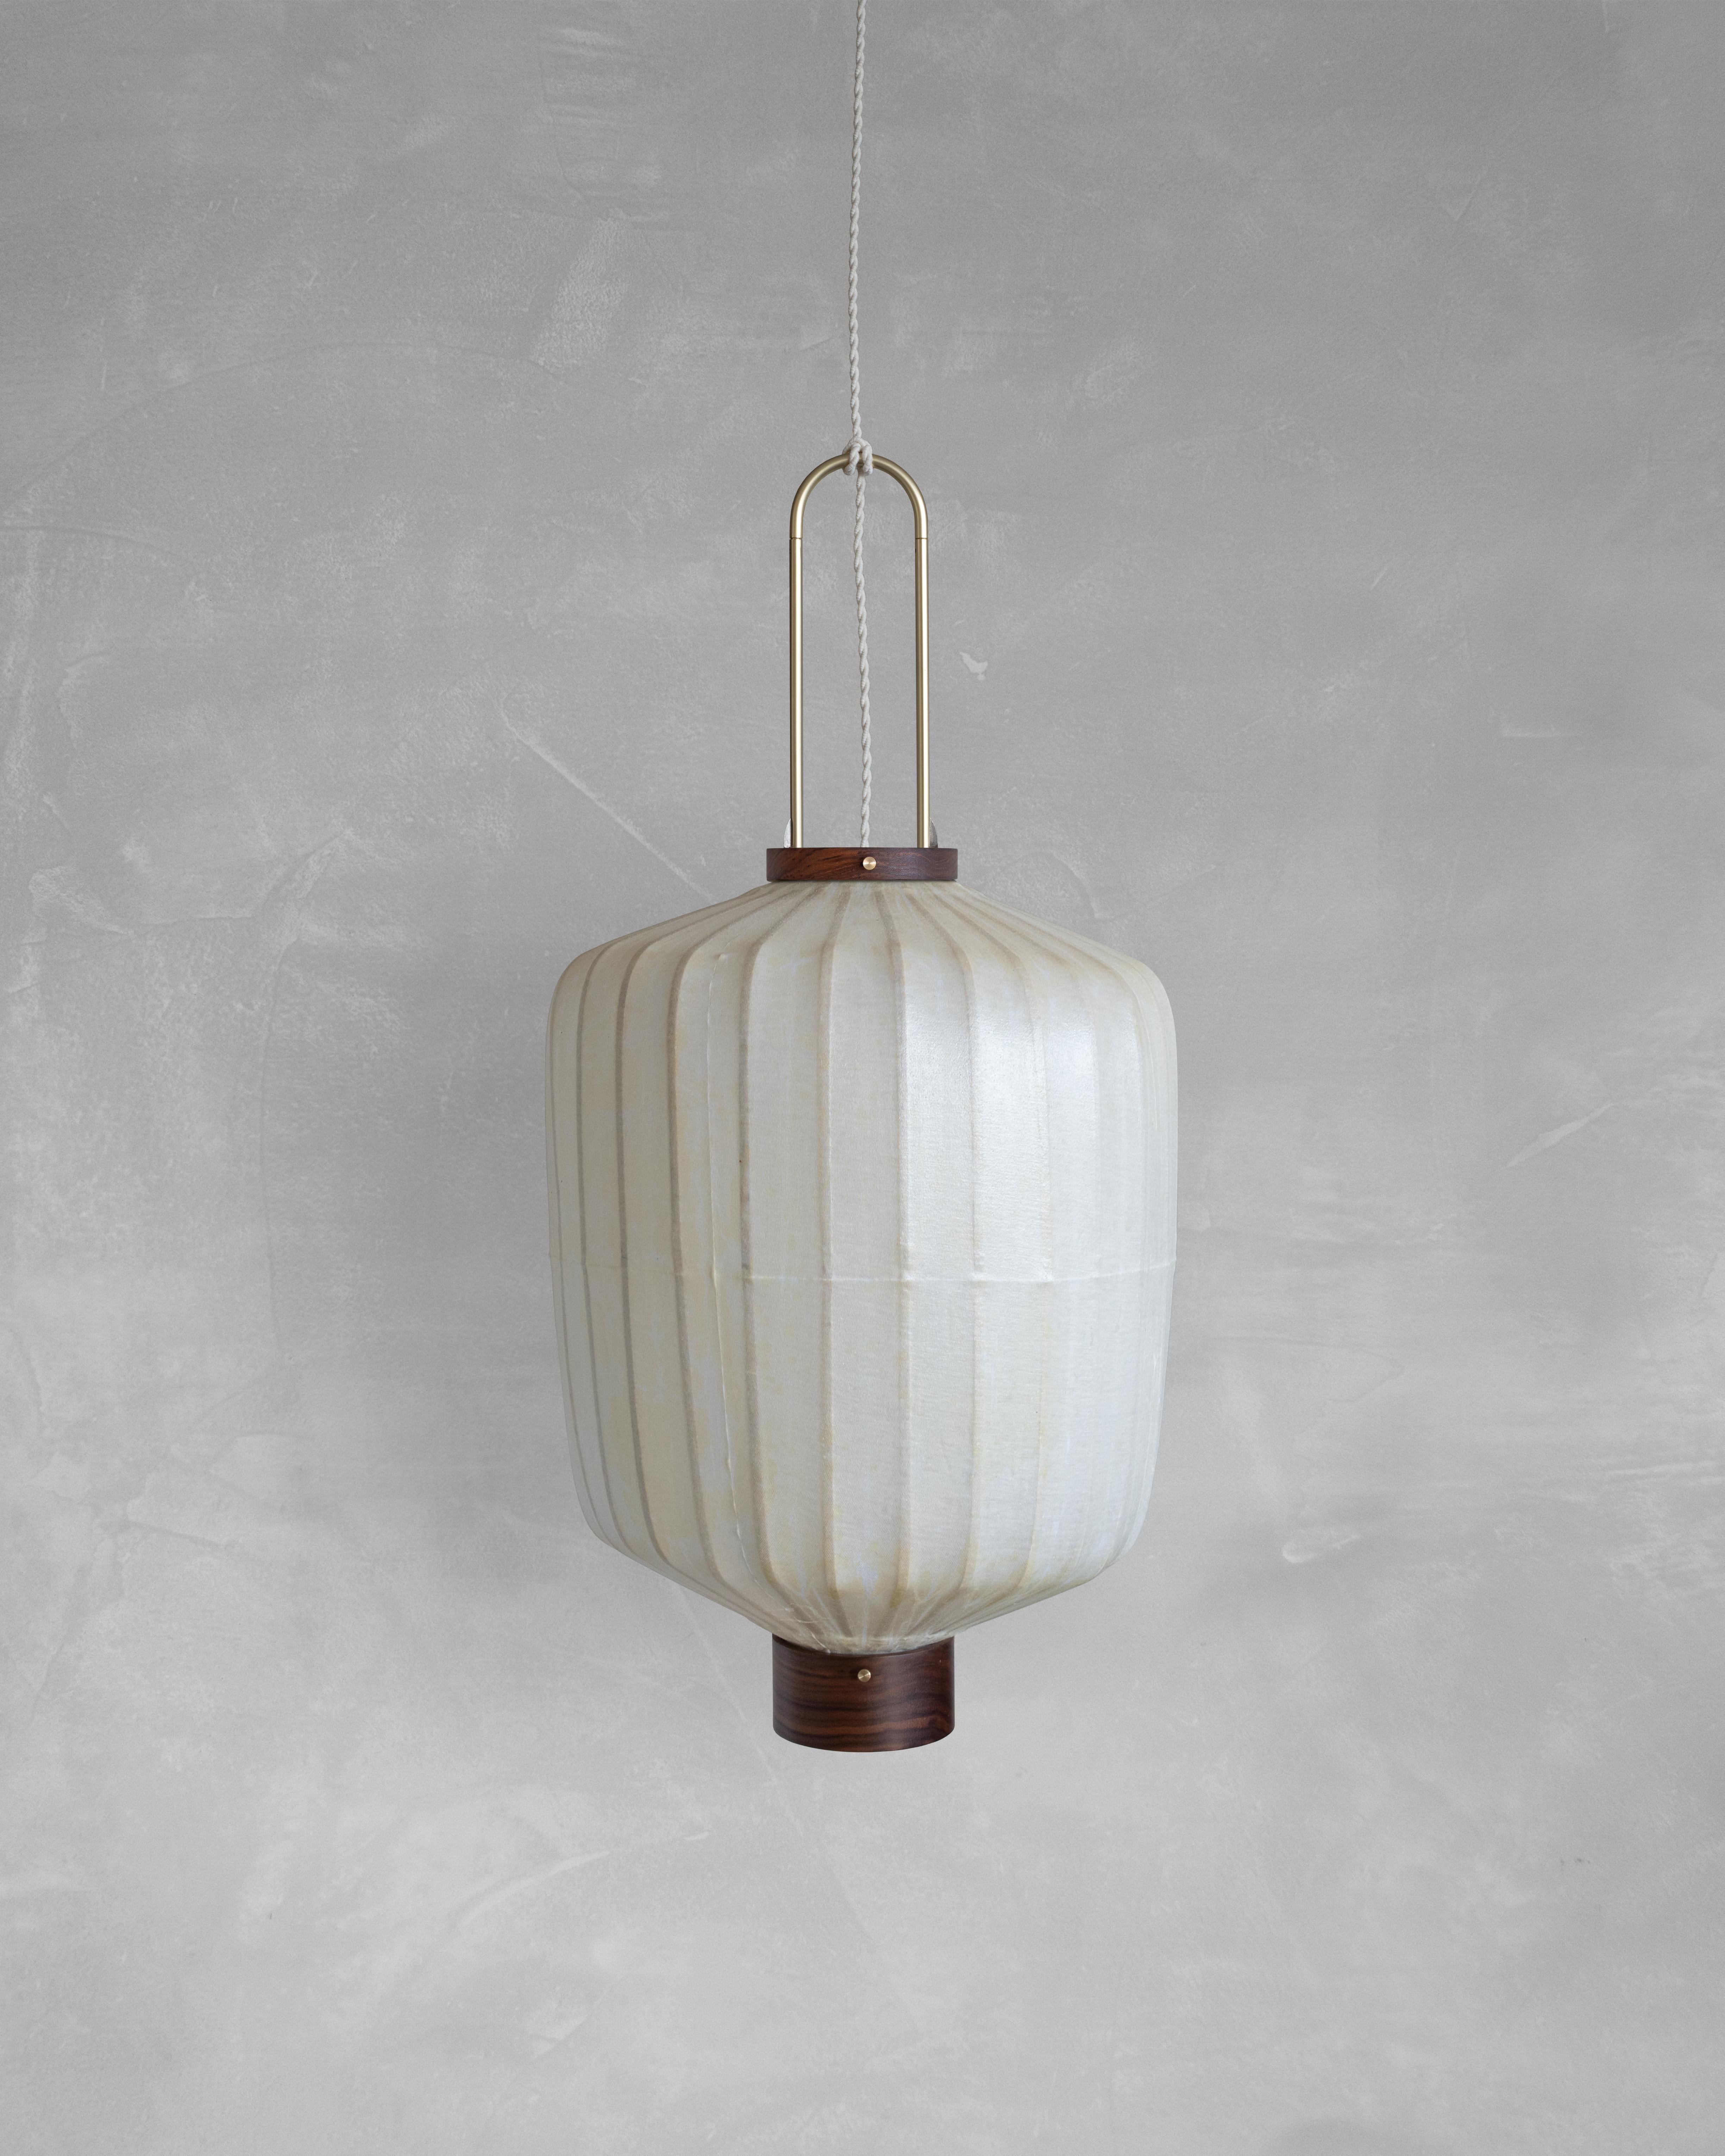 HU02B Pendant Lamp XL by Taiwan Lantern
Dimensions: D 47 x W 47 x H 63 cm.
Material: Walnut & bamboo frame, Hand-colored fabrics, Metal pipes, Leather lace, Handmade porcelain ceiling cap.


This brown color is inspired by Wu Xing 五行. Brown presents